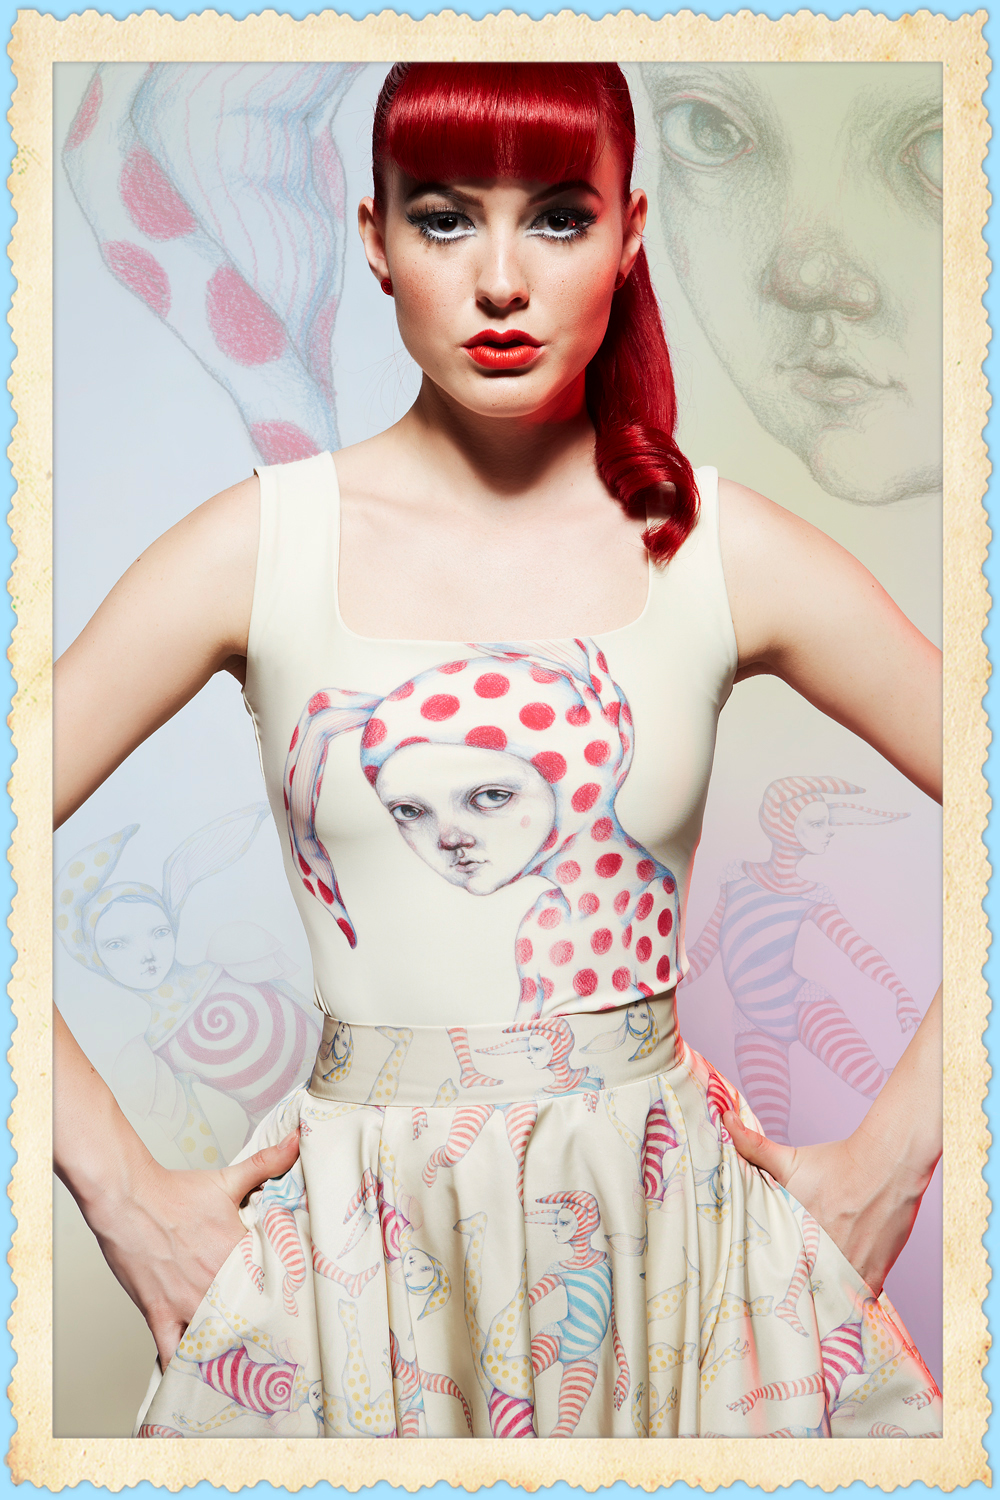 knapp rabbits prints new Collection bulgarian brand textile fairy Retro stripes dots dress trenchcoat red